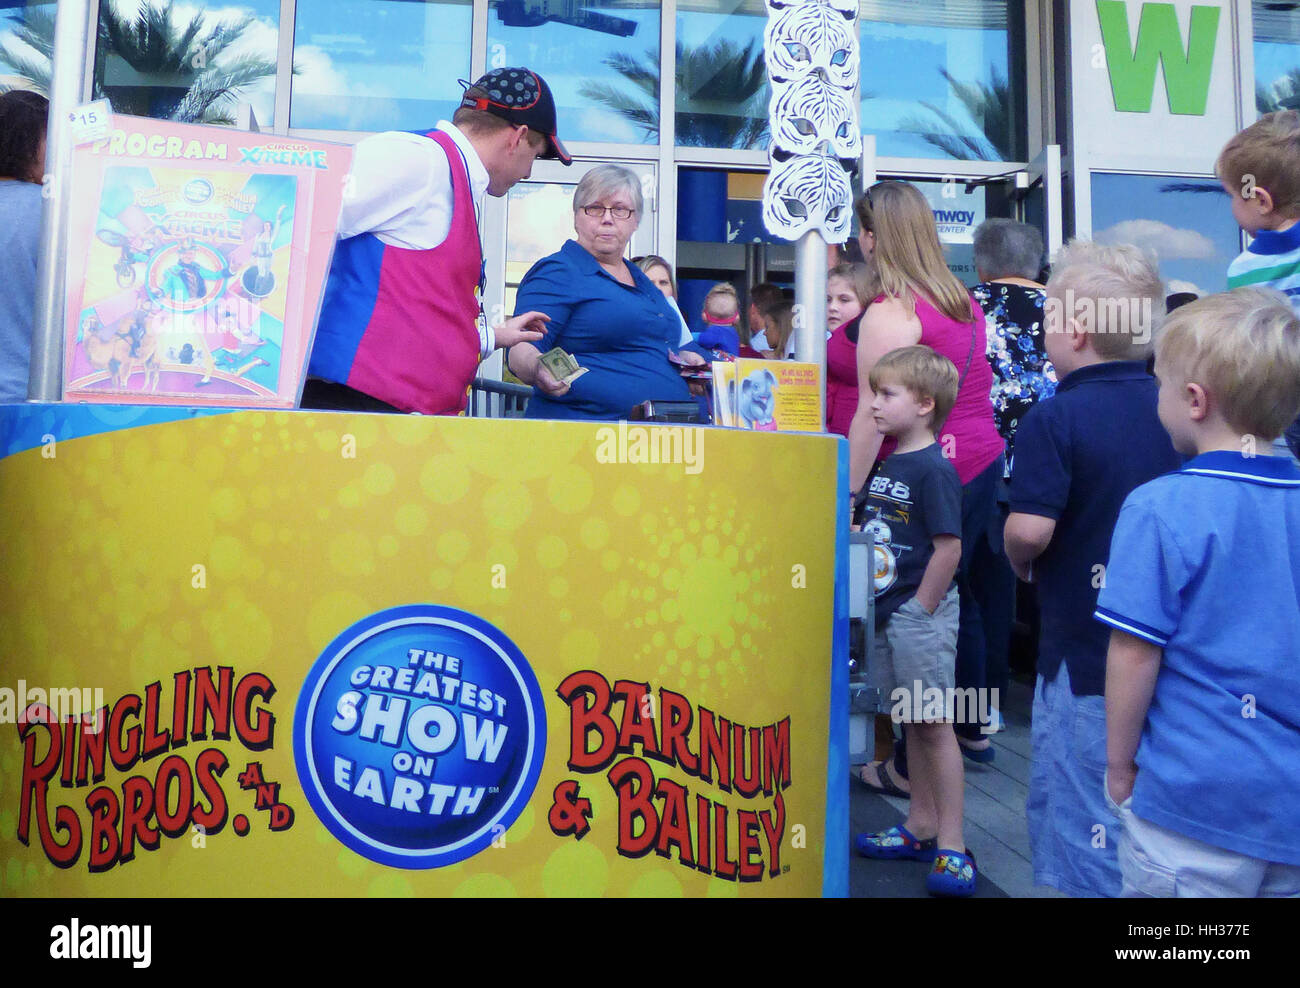 Orlando, USA. 16th January, 2017. People wait in line to enter the Amway Center in Orlando, Florida  to see the final Orlando performance of the Ringling Brothers and Barnum and Bailey Circus. The circus announced on January 14, 2017 that it will have its final performance in May after a 146-year run, citing declining attendance and high operating costs. Credit: Paul Hennessy/Alamy Live News Stock Photo